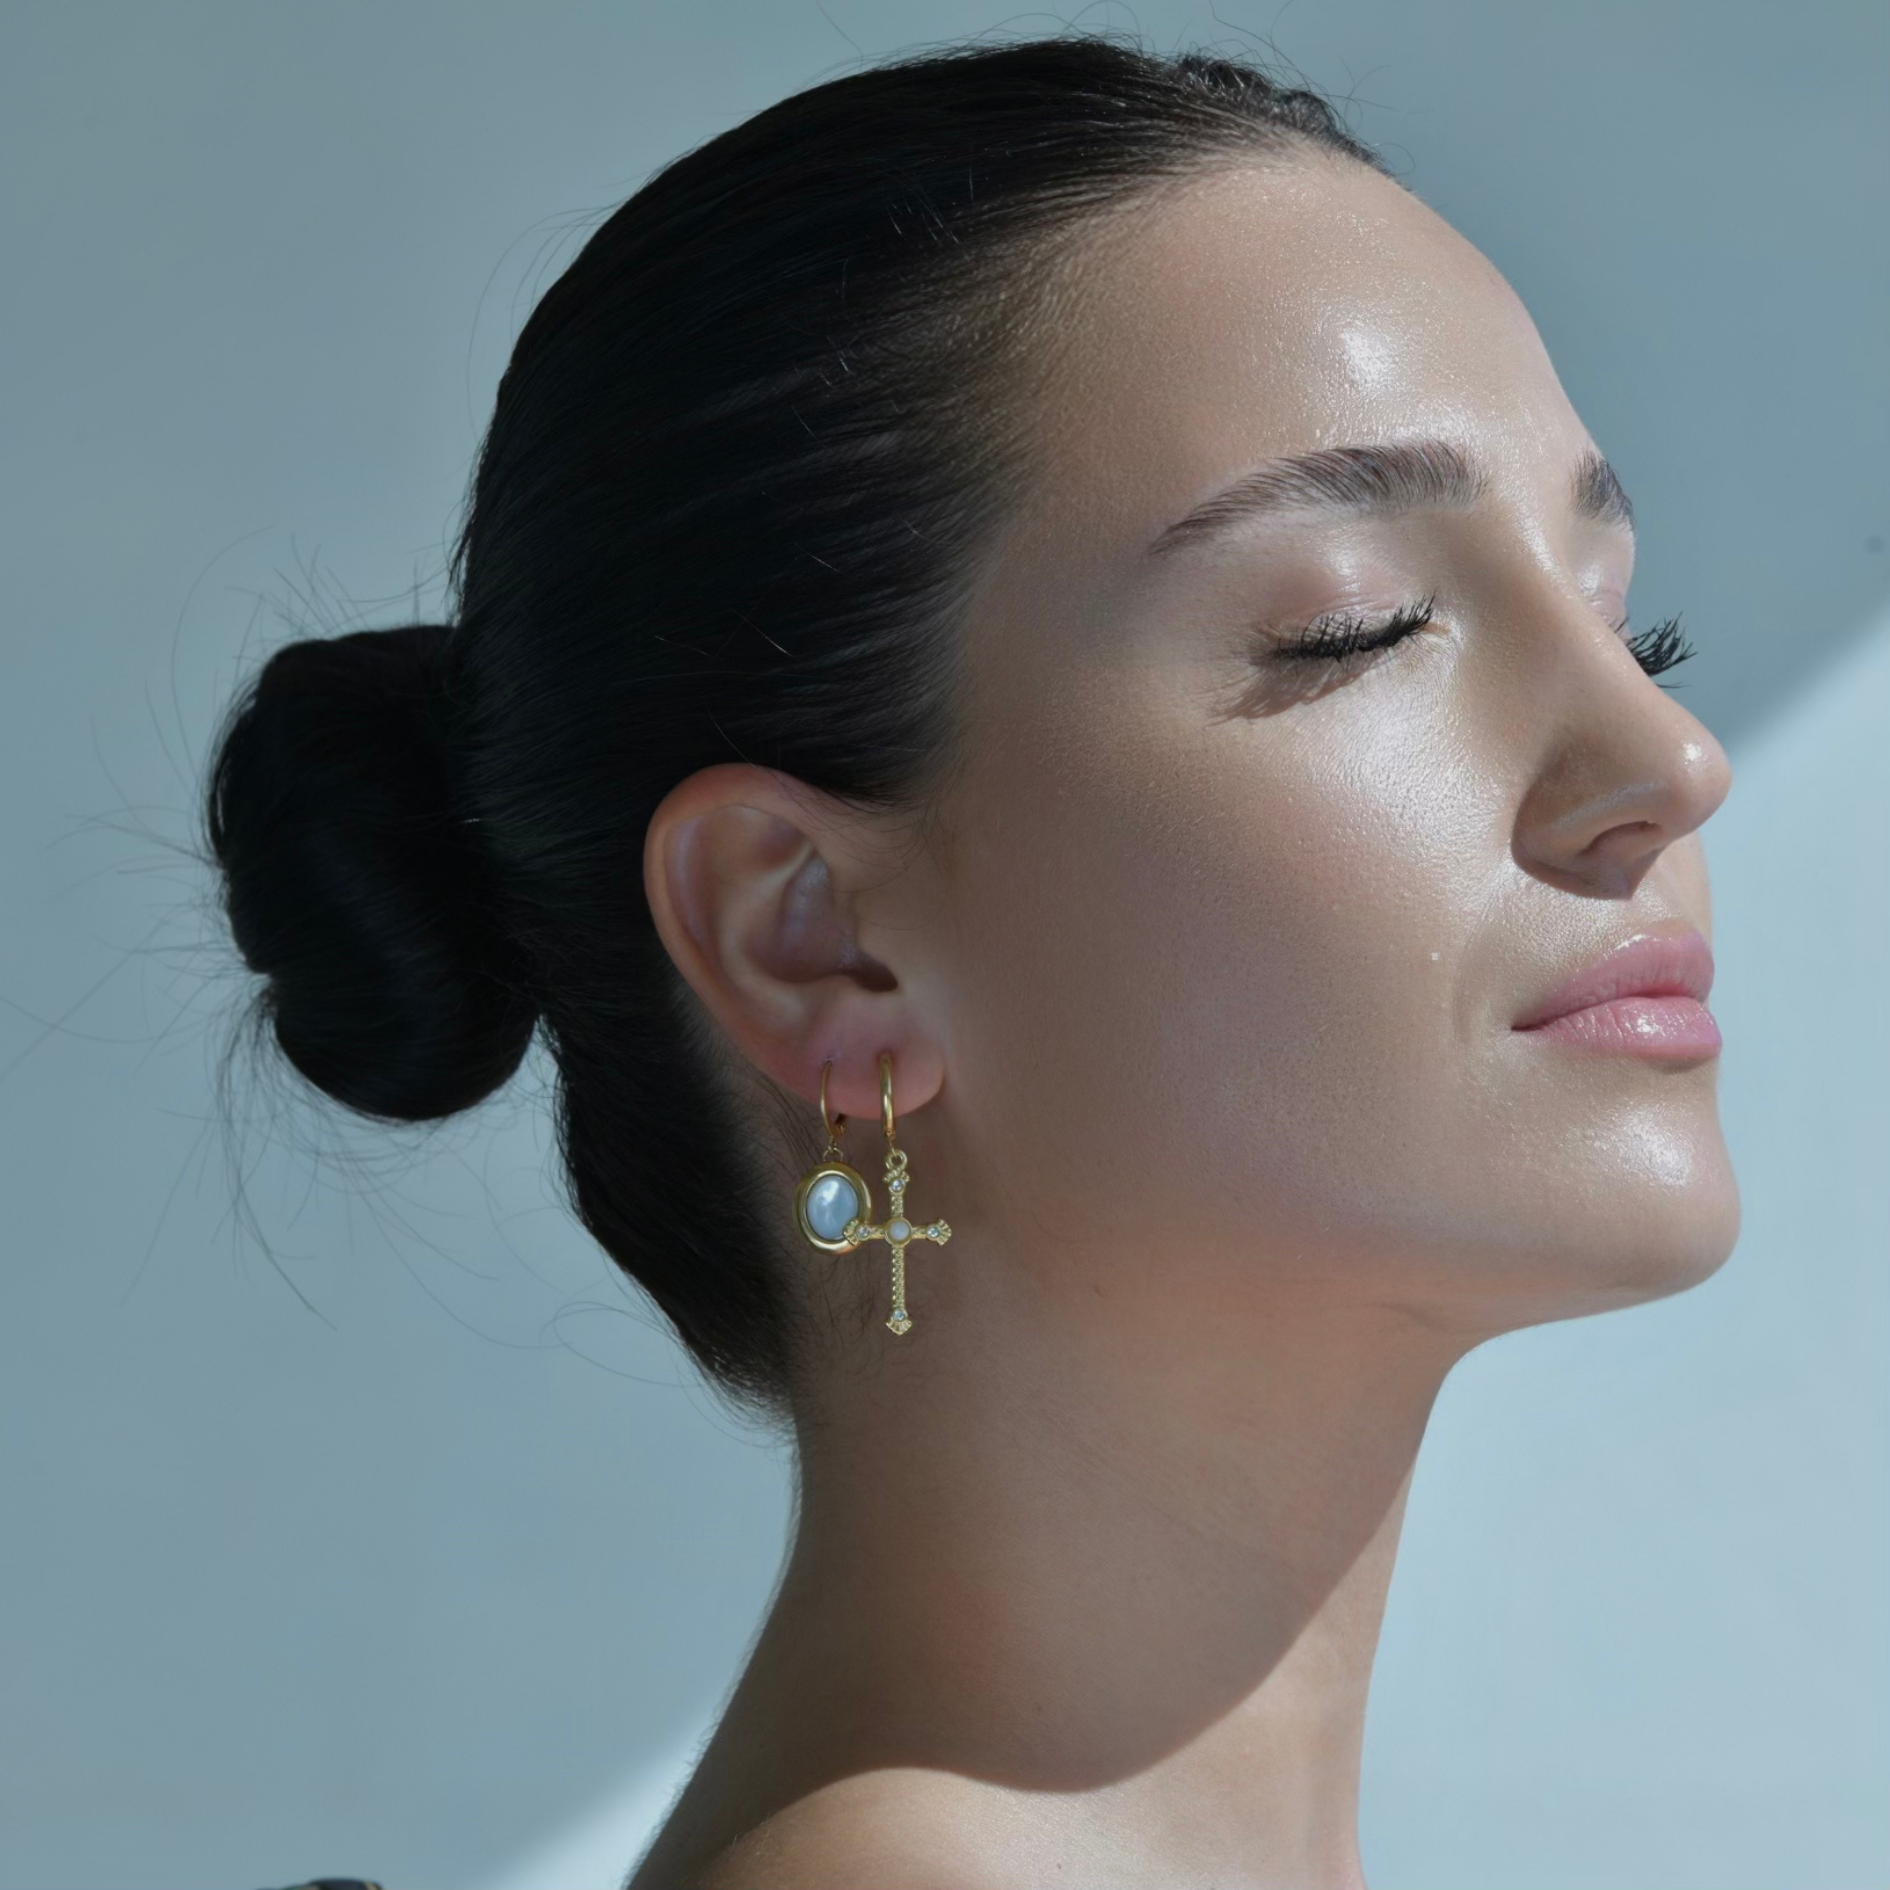 Gold hoop earrings with oval mother pearl drop. The Capri Cross Zircon Earring coupled with Seine Earrings